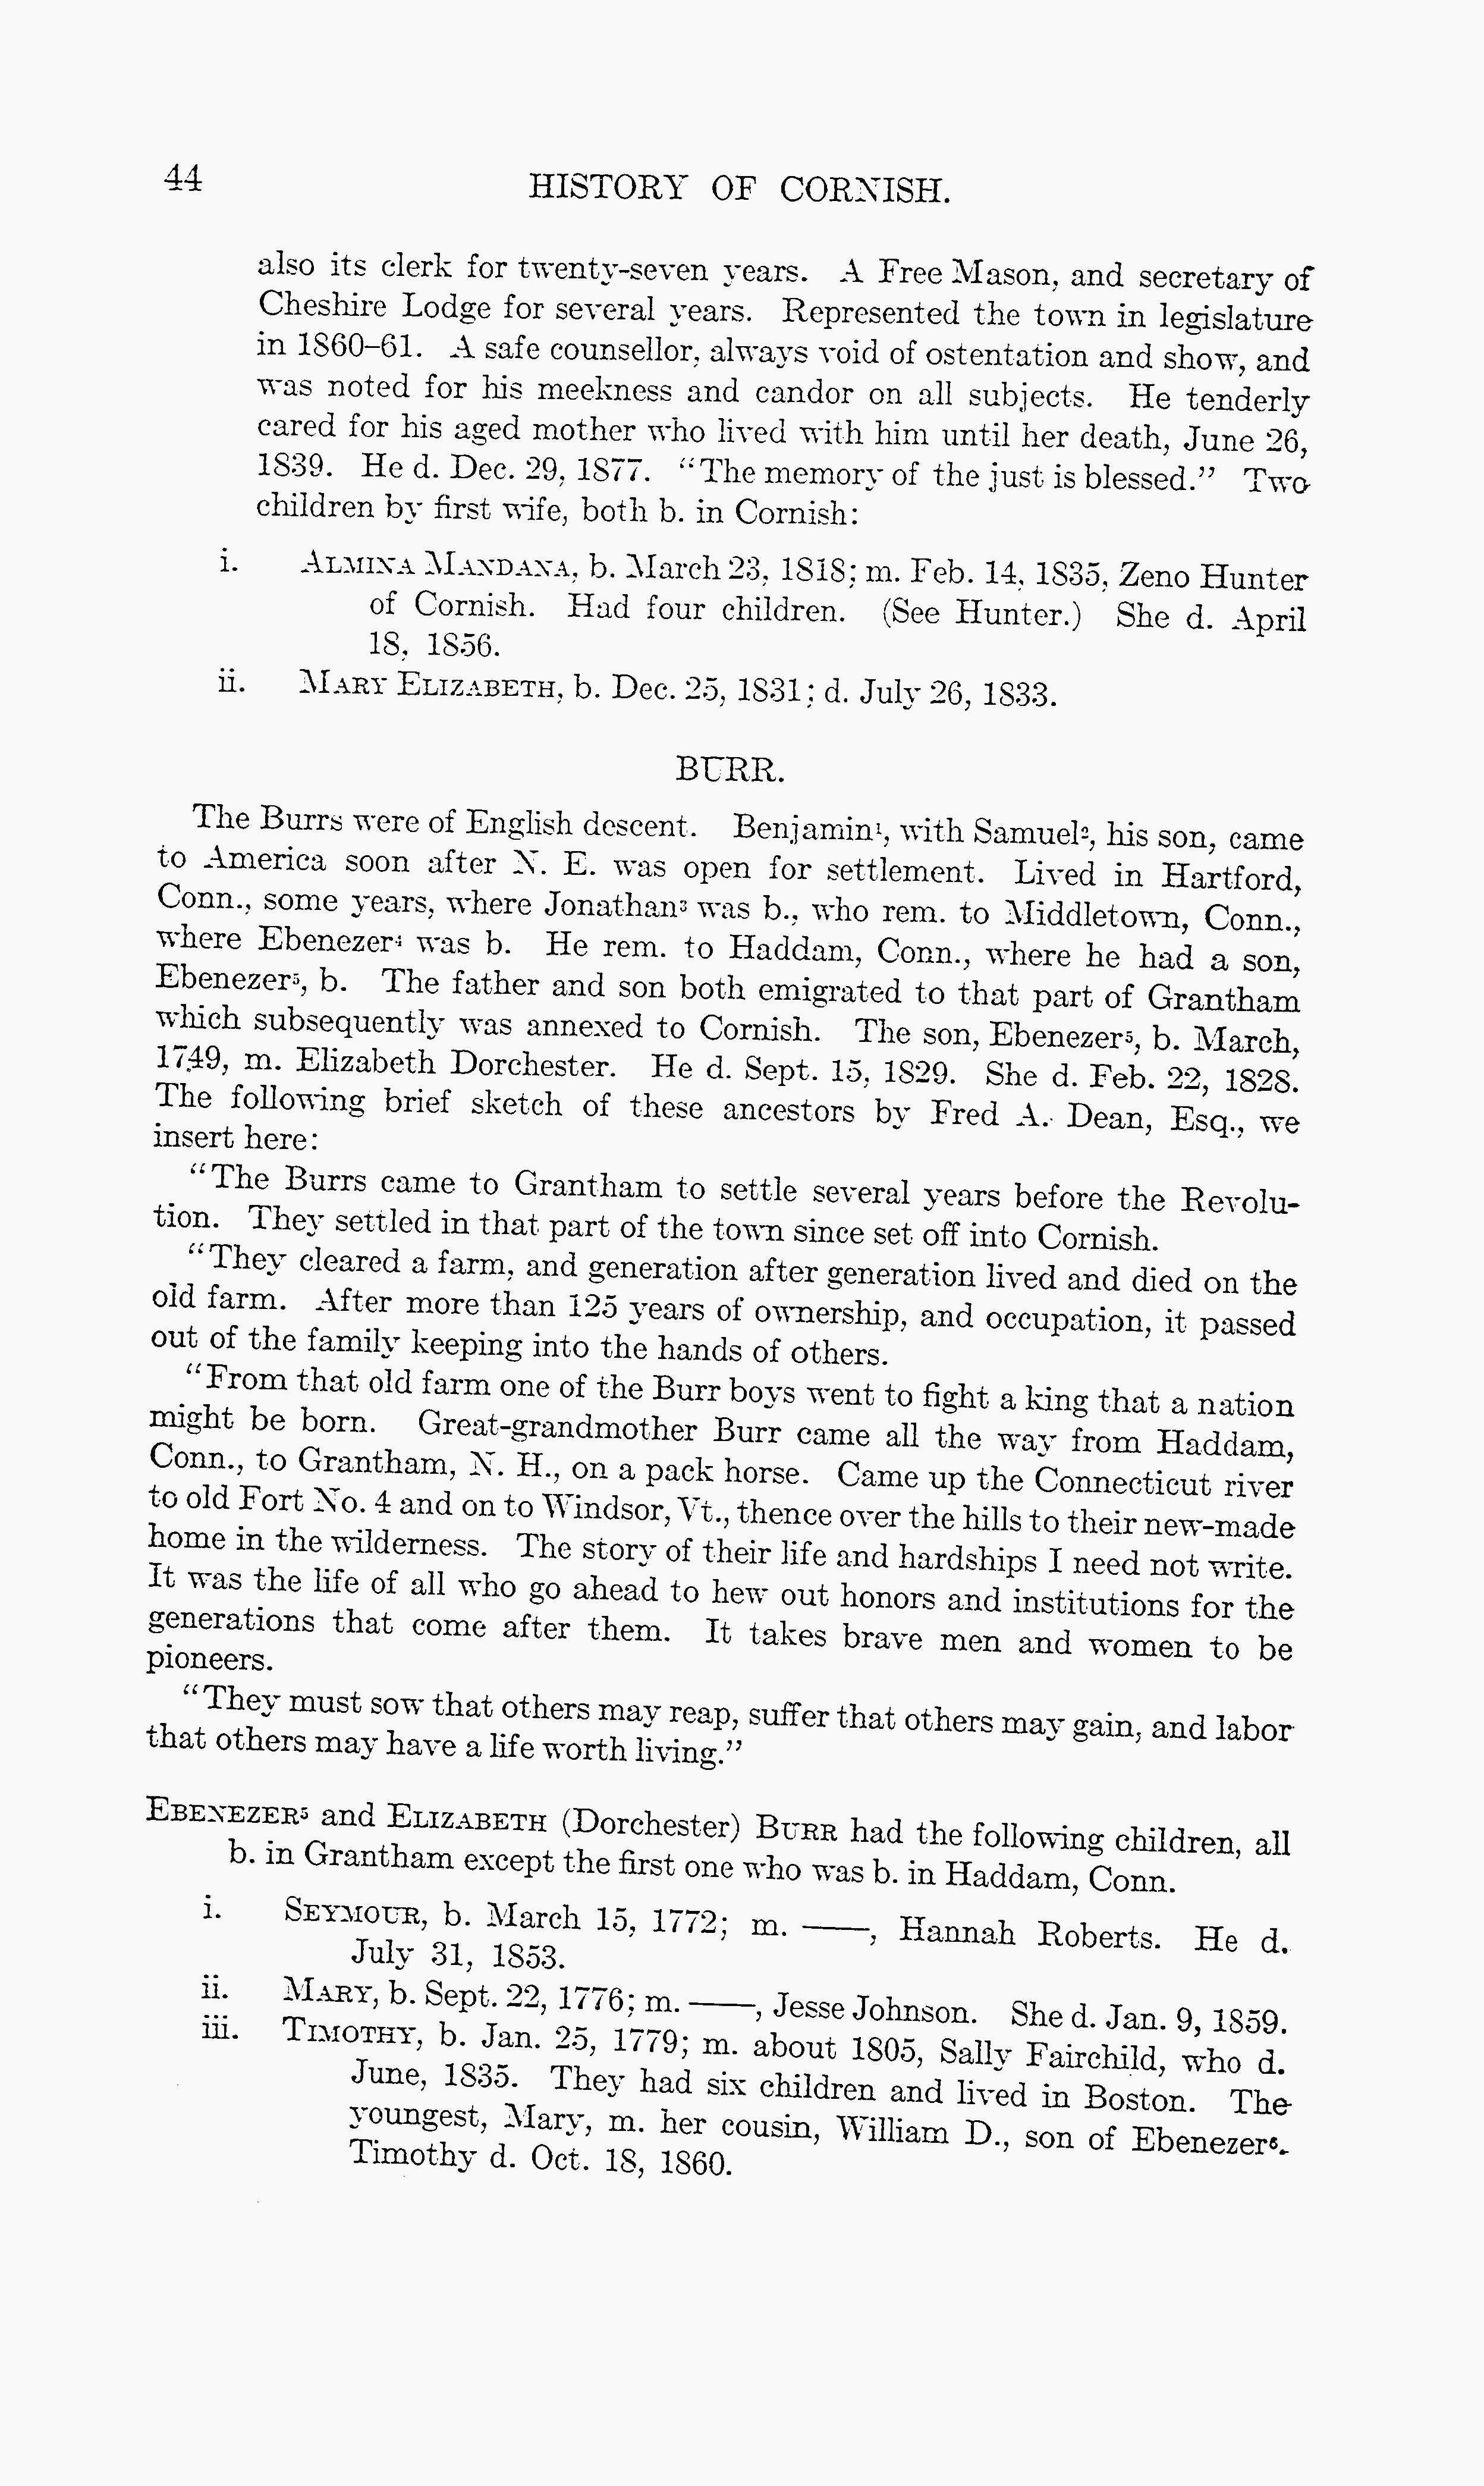 History of the town of Cornish, New Hampshire : with genealogical record, 1763-1910